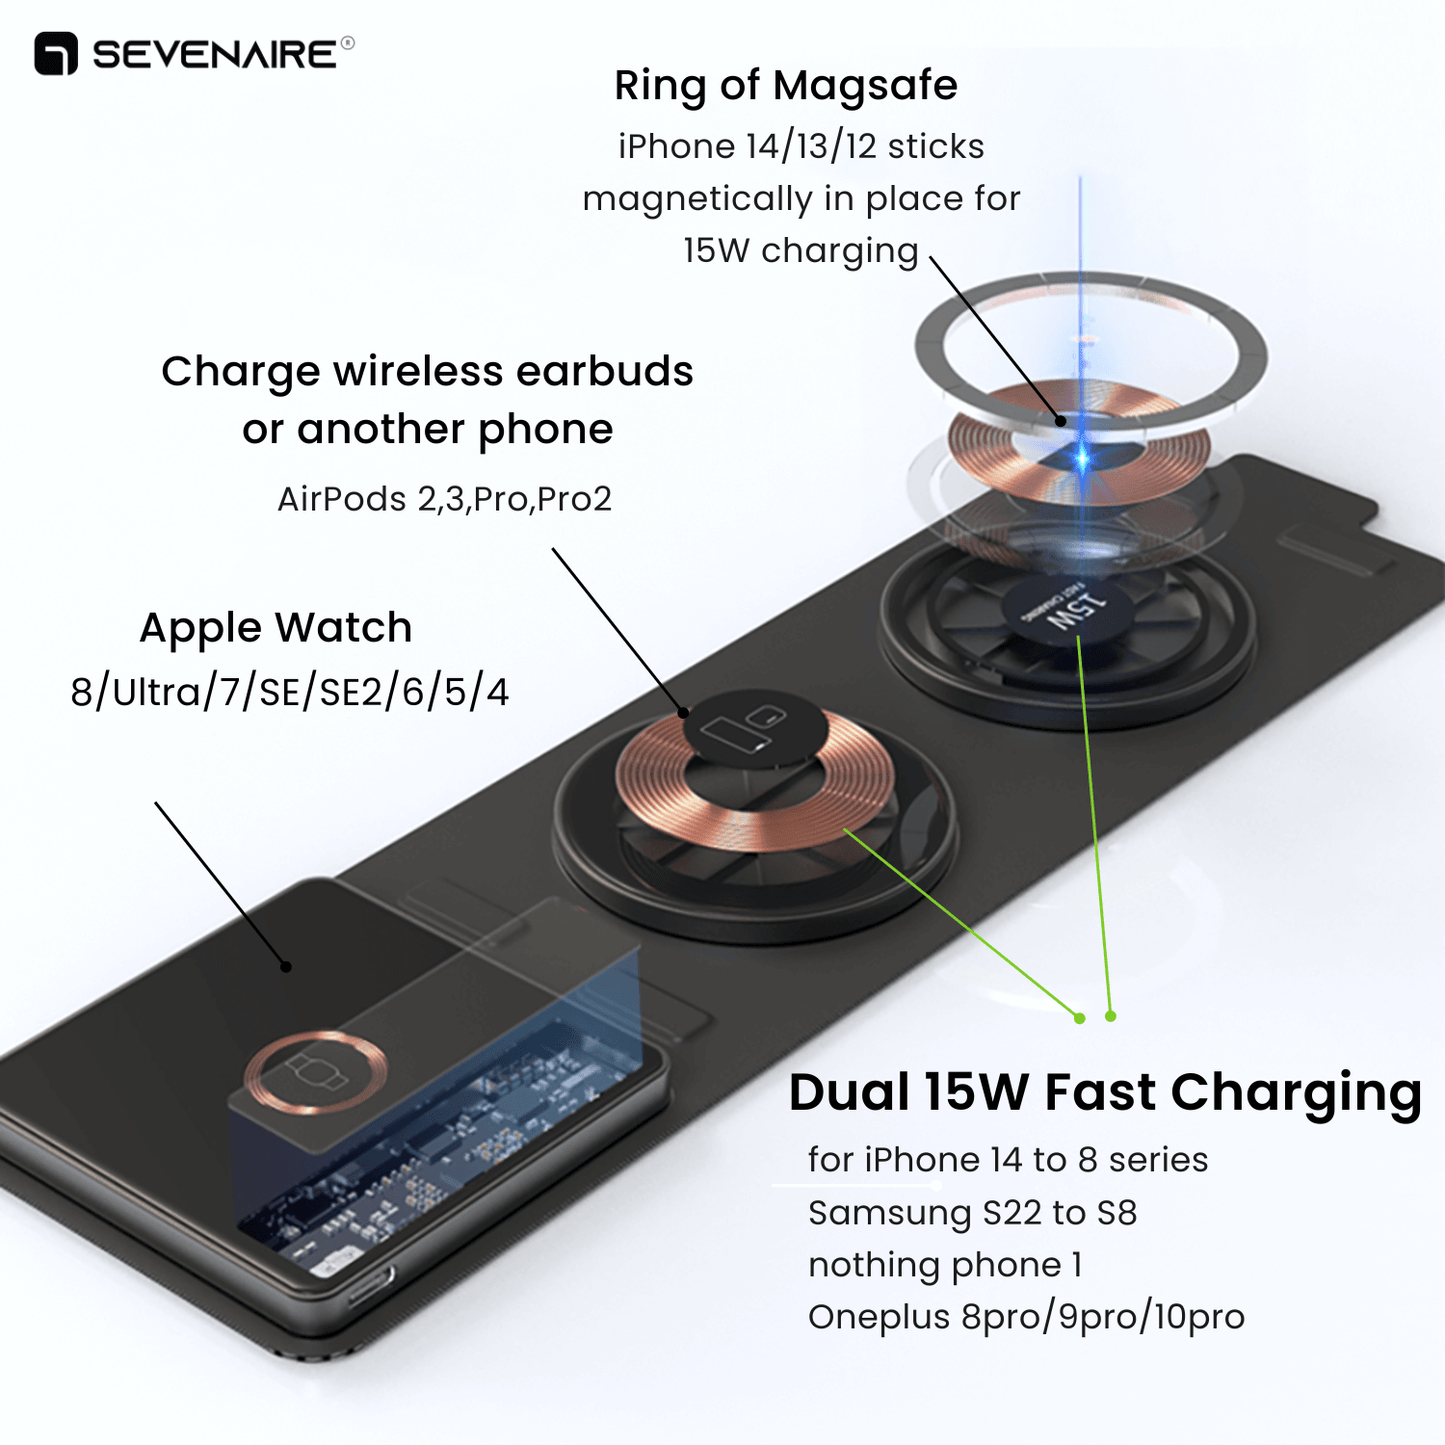 MagCharge 3-in-1 Foldable Wireless Charger (D2050)